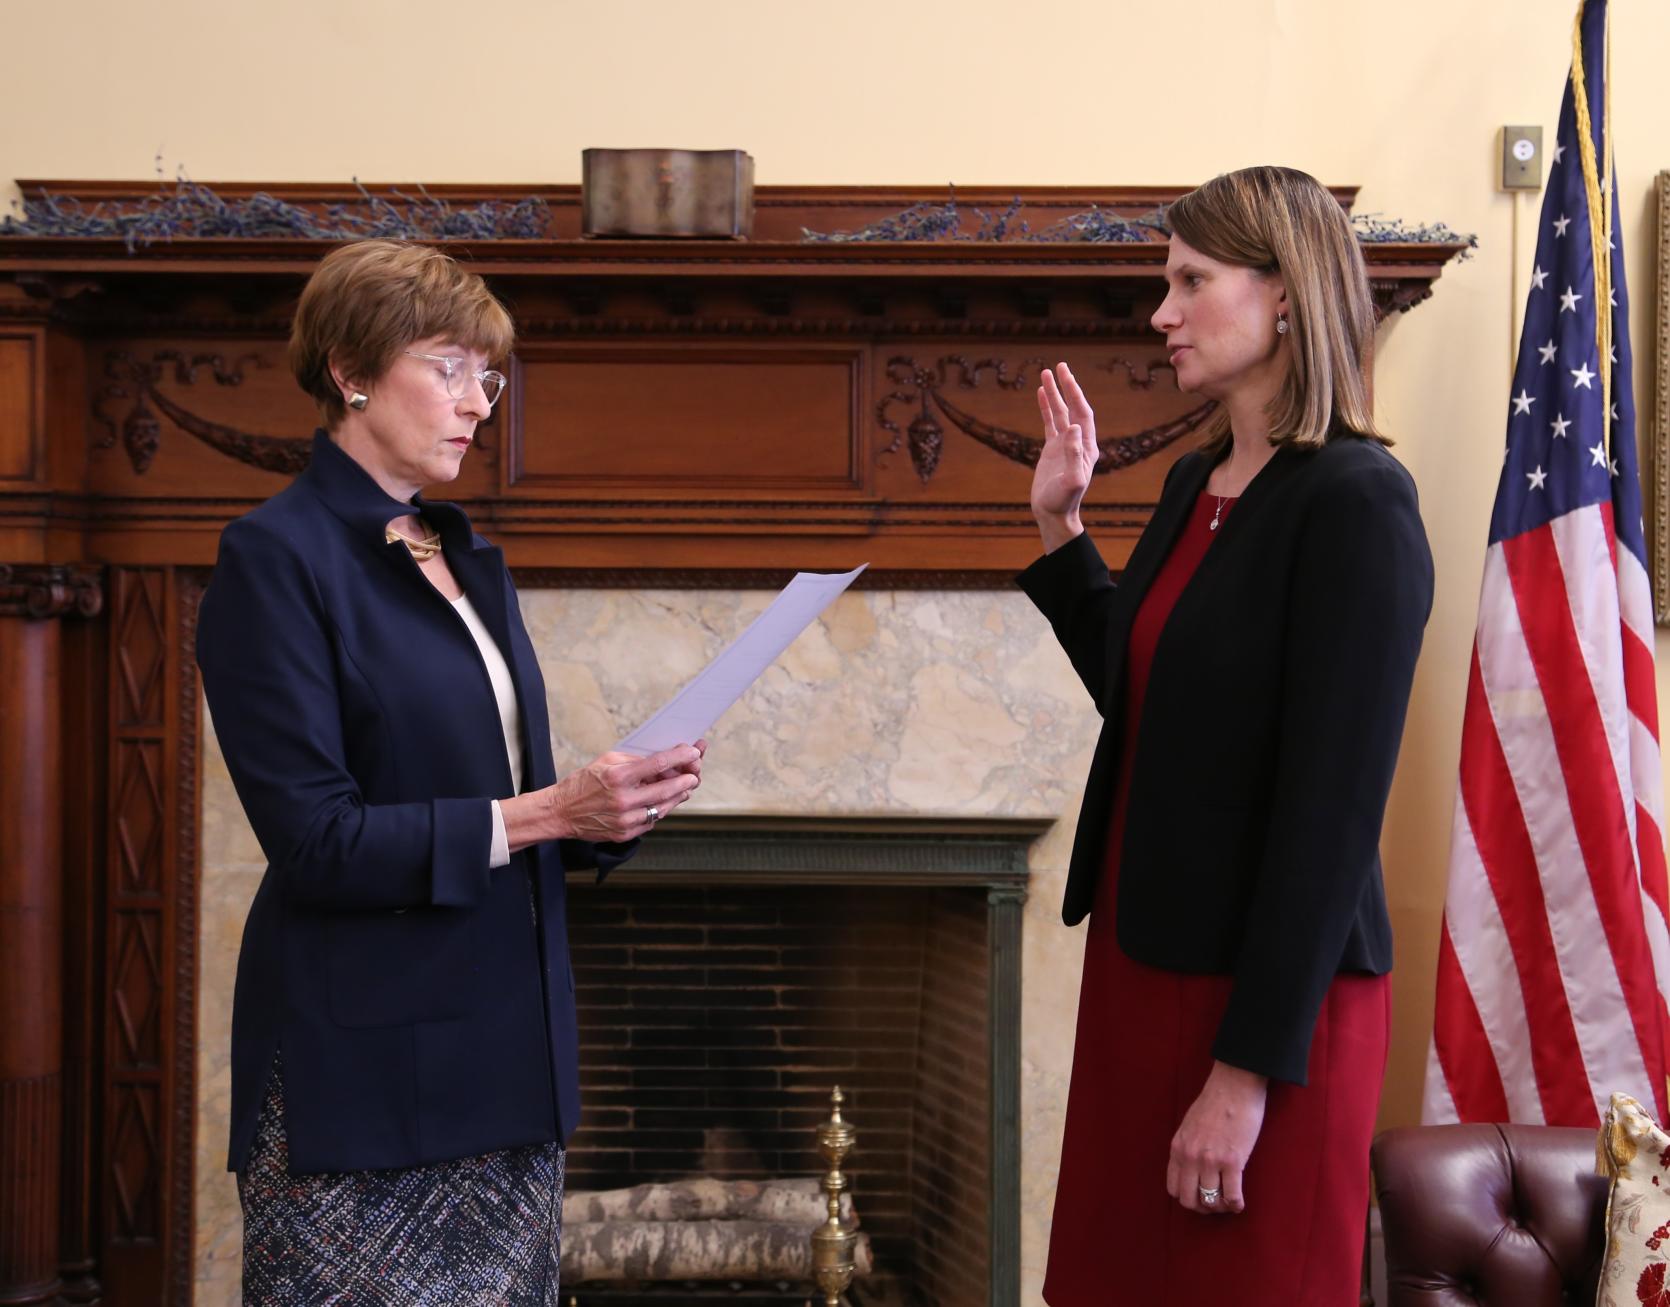 State Auditor Suzanne M. Bump appointed Meredith Barrieau as First Deputy Auditor.